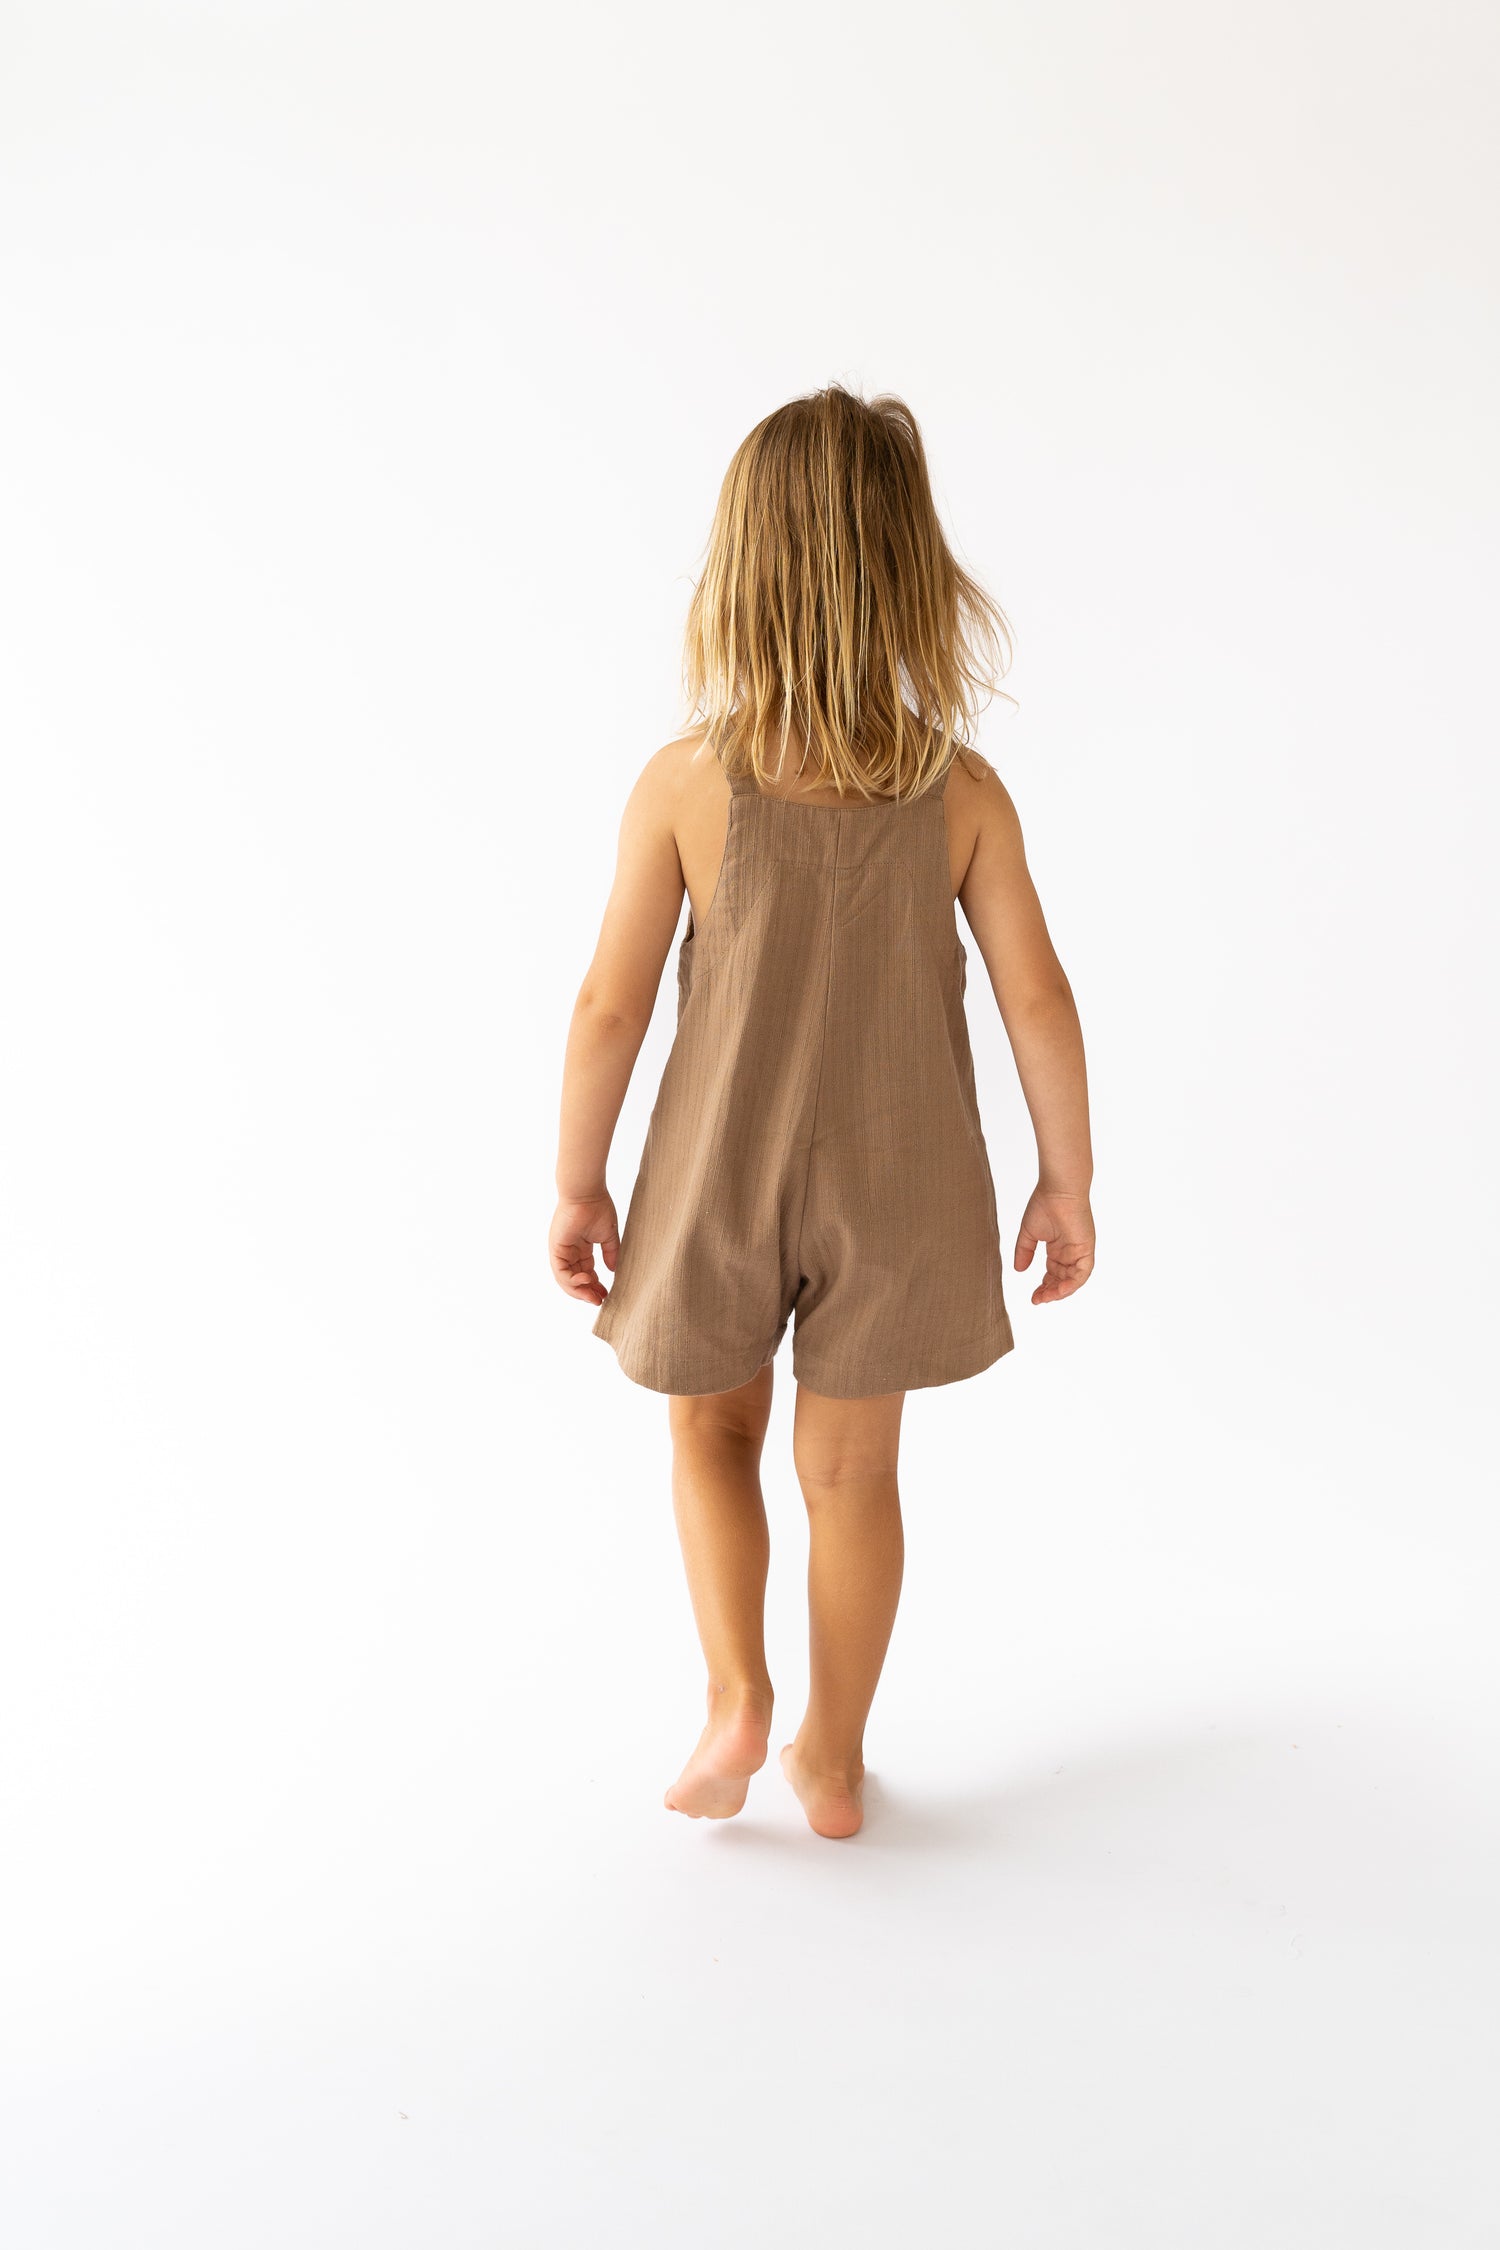 Unisex Short Marlow Overalls or Dungarees| Chocolate